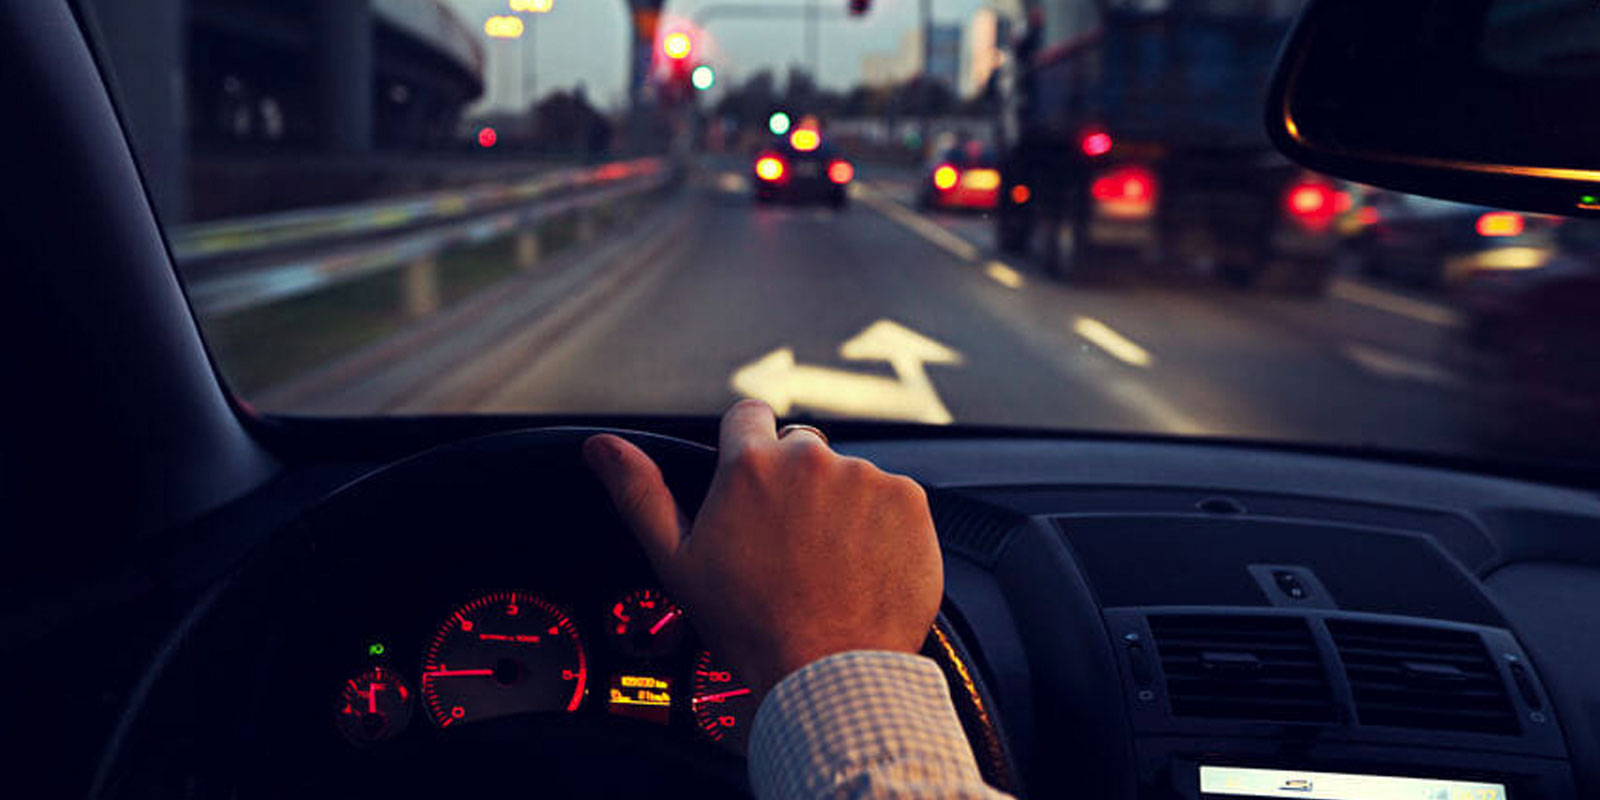 Night Driving: Top 10 Safety Tips for Driving in the Dark